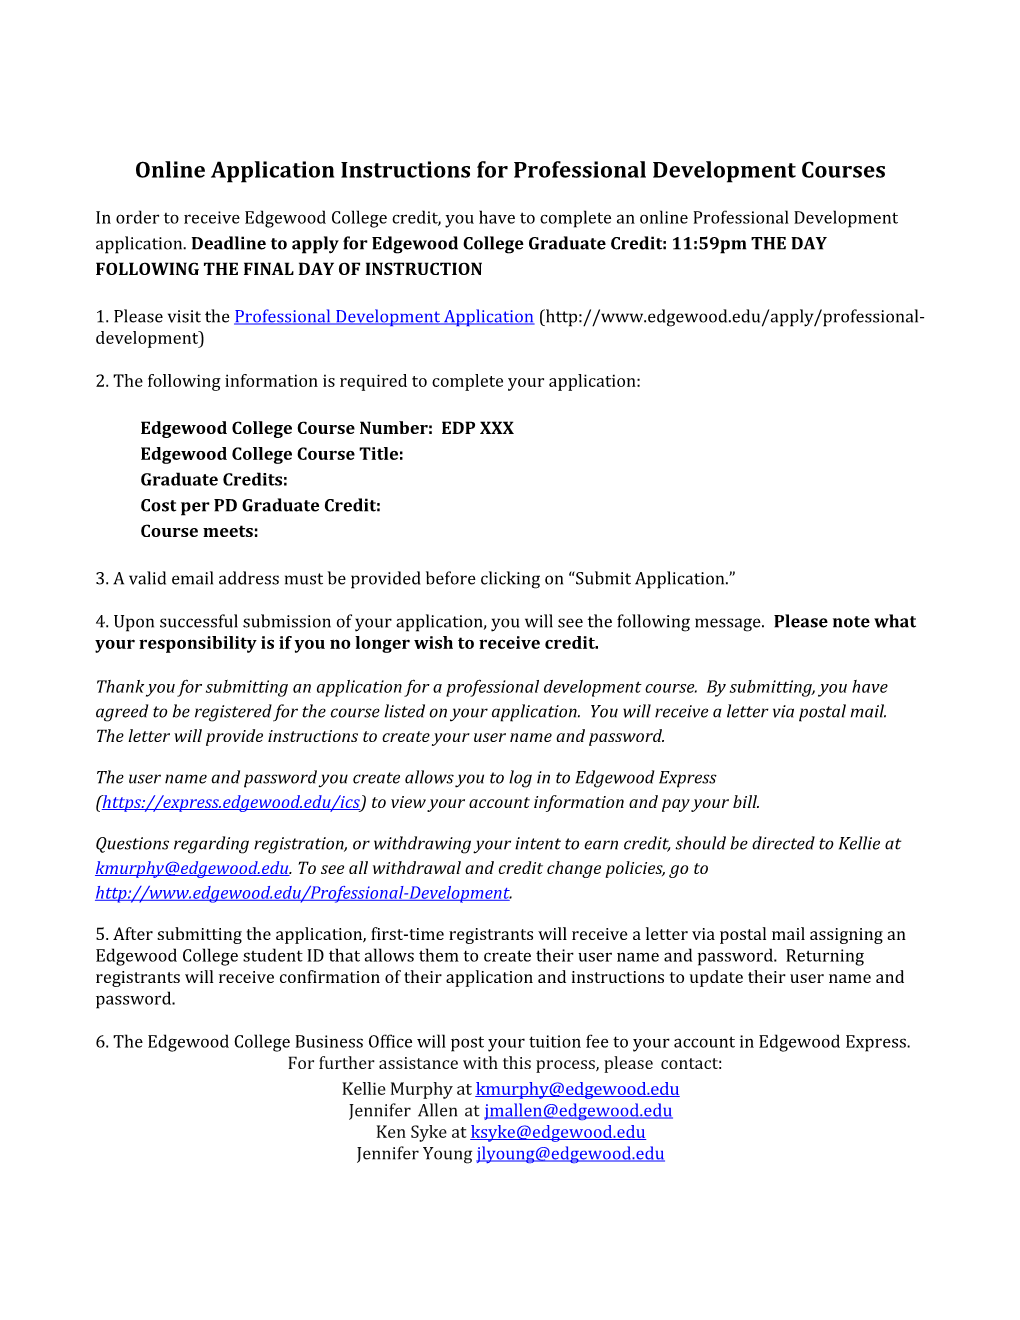 Online Application Instructions for Professional Development Courses